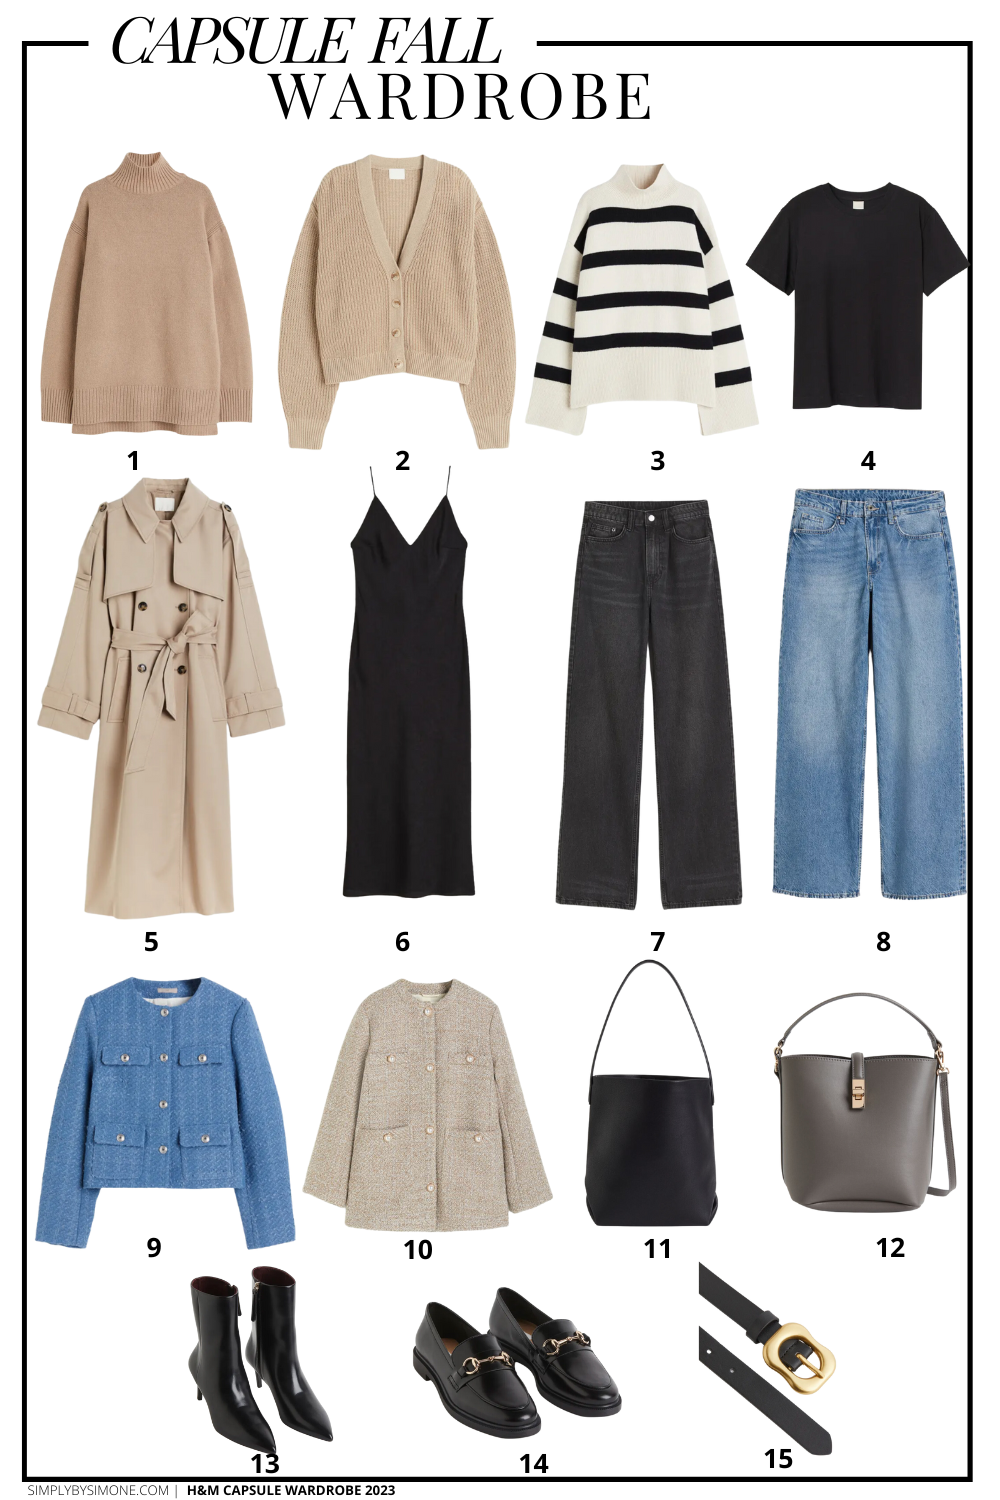 Affordable H&M Fall Capsule Wardrobe | 15 Pieces, 48 Outfits | How to Build a Capsule Wardrobe | H&M Fall Clothes | Outfit Inspiration | 48 Fall Weather Outfit Ideas | Fall Vacation Packing Guide | H&M Fall Capsule Wardrobe - What To Wear This Fall 2023, Parisian Outfit Ideas | Items 1-15 | Simply by Simone